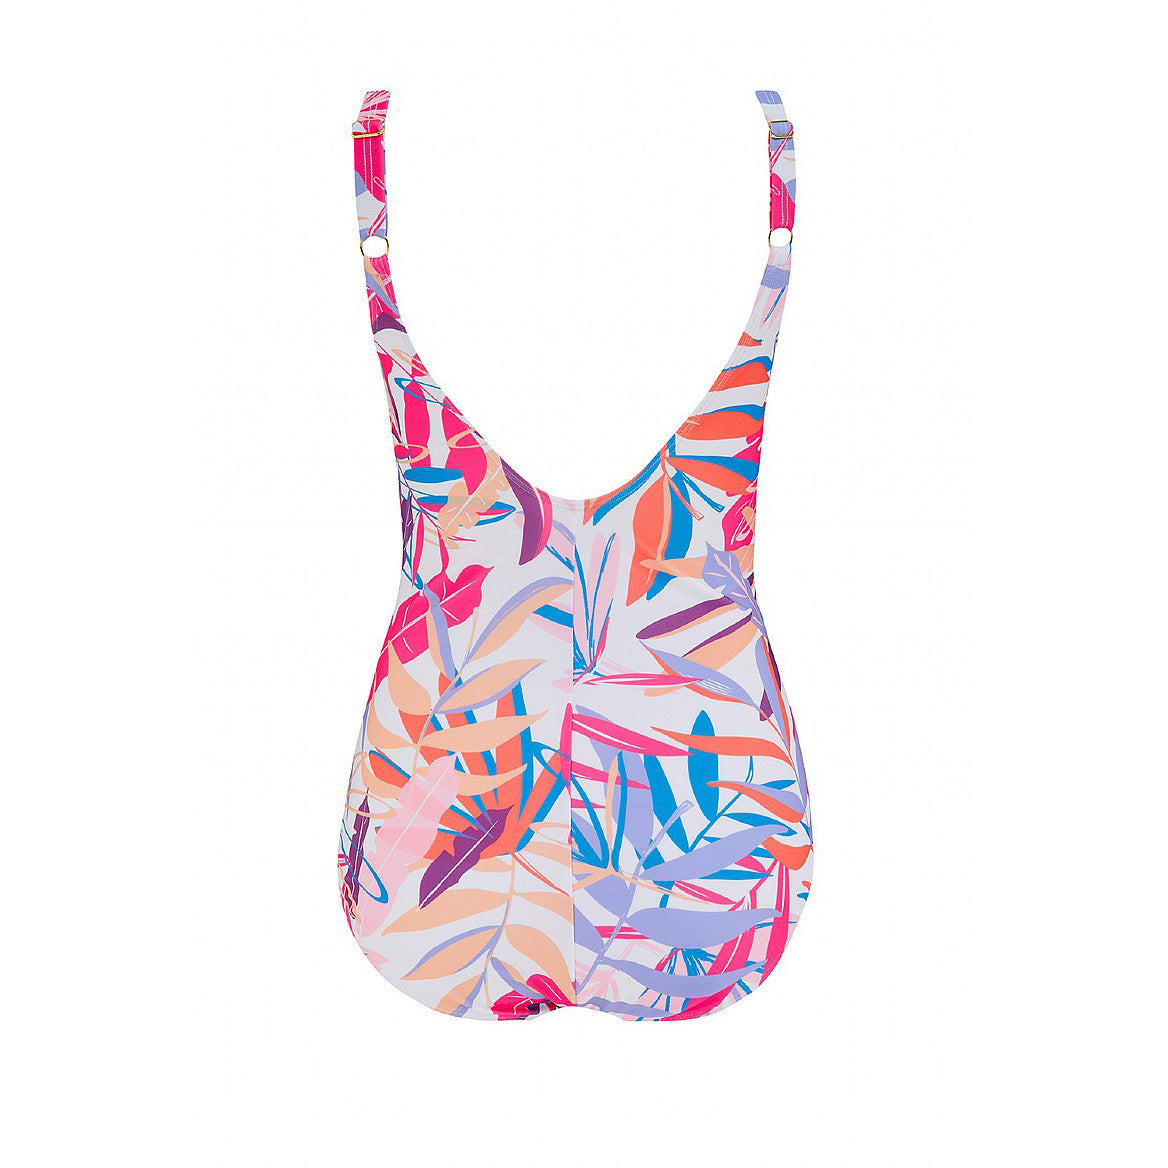 Cocoa Beach Swimsuit in a vibrant palm leaf print | Swimwear from Nicola Jane | Pocketed mastectomy swimwear for women touched by breast cancer